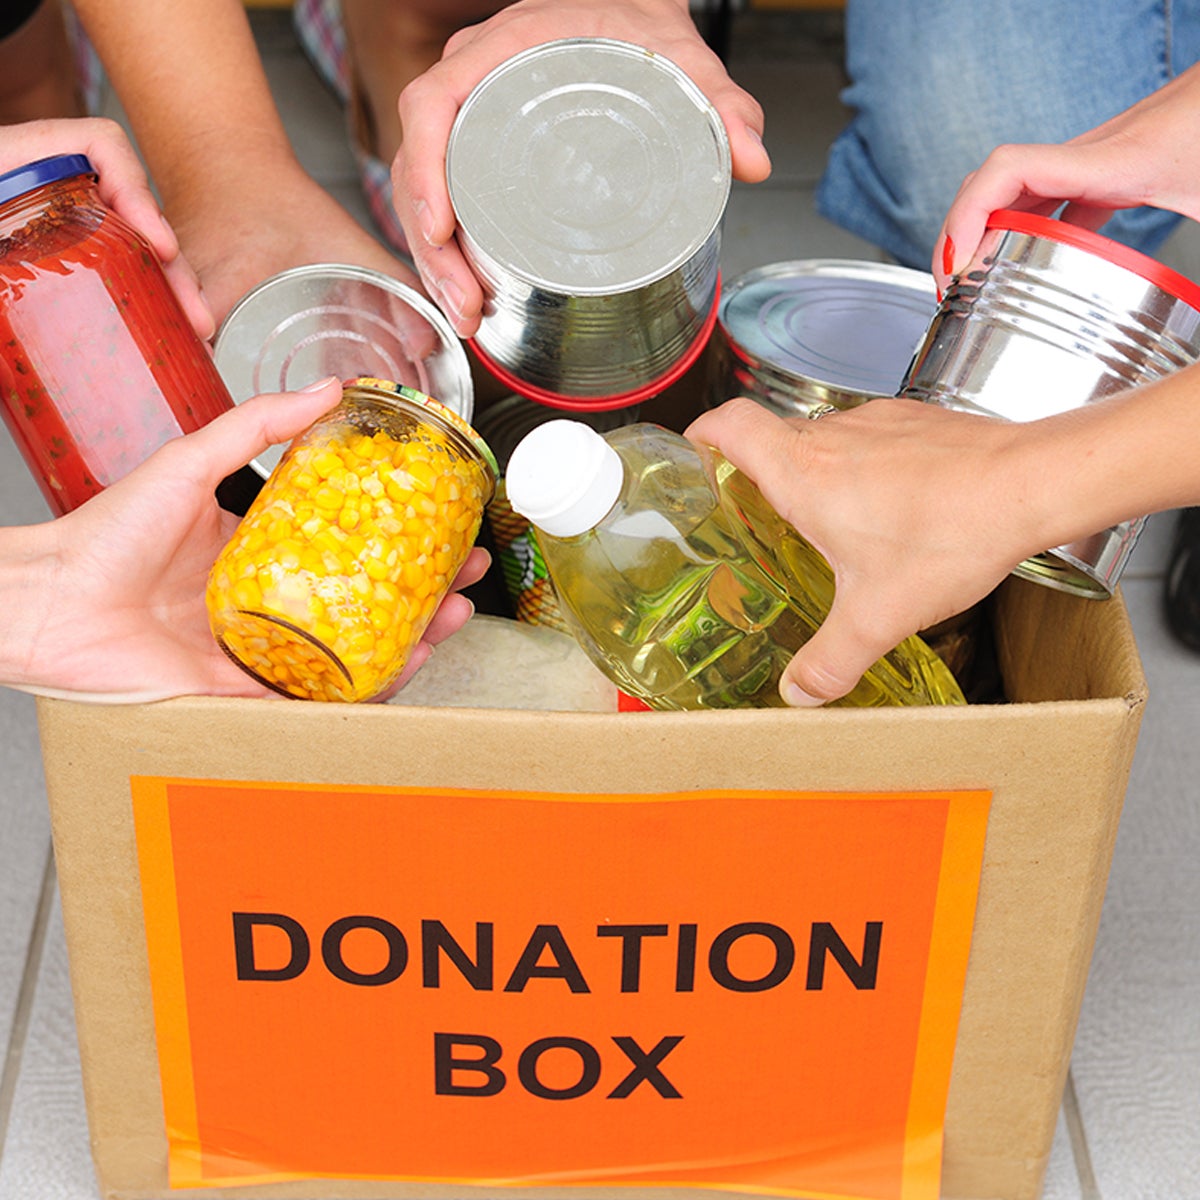 plex-partners-with-gleaners-to-help-end-hunger-in-southeastern-michigan.jpg